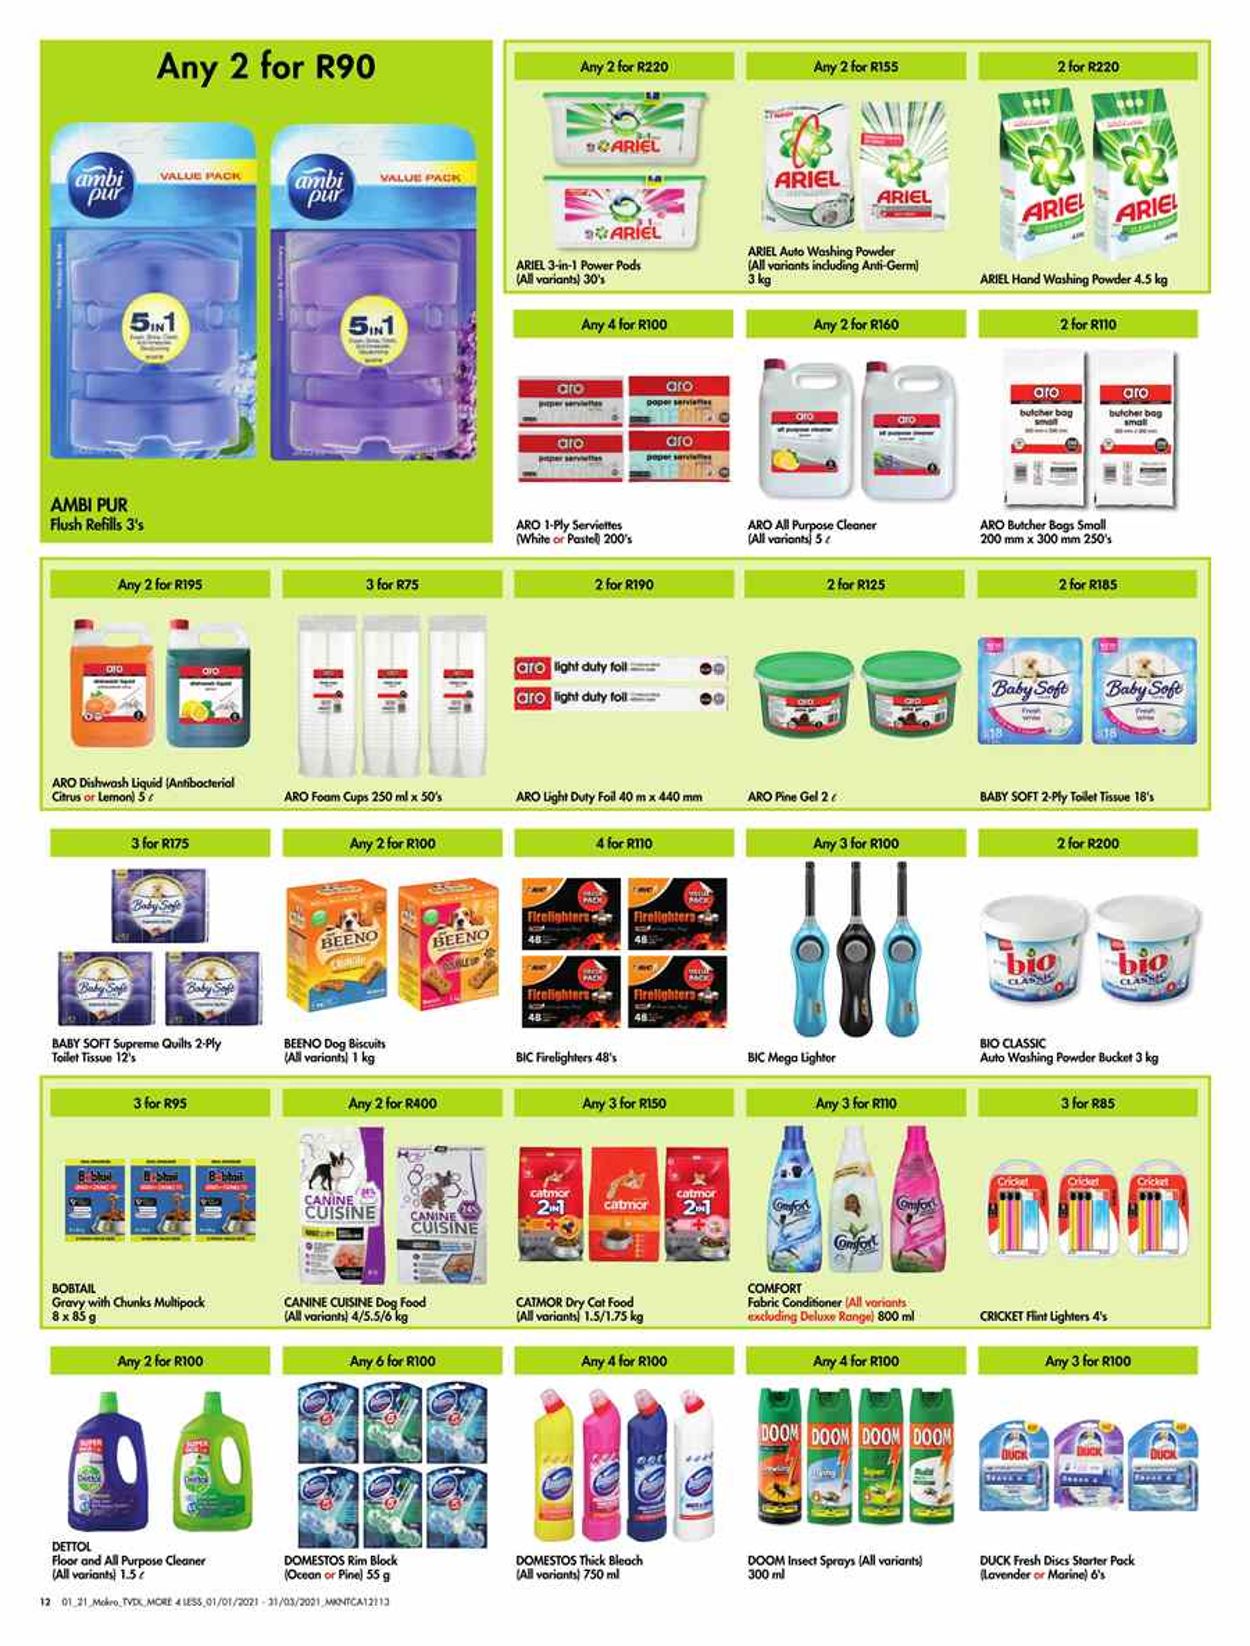 Makro Catalogue from 2021/01/01